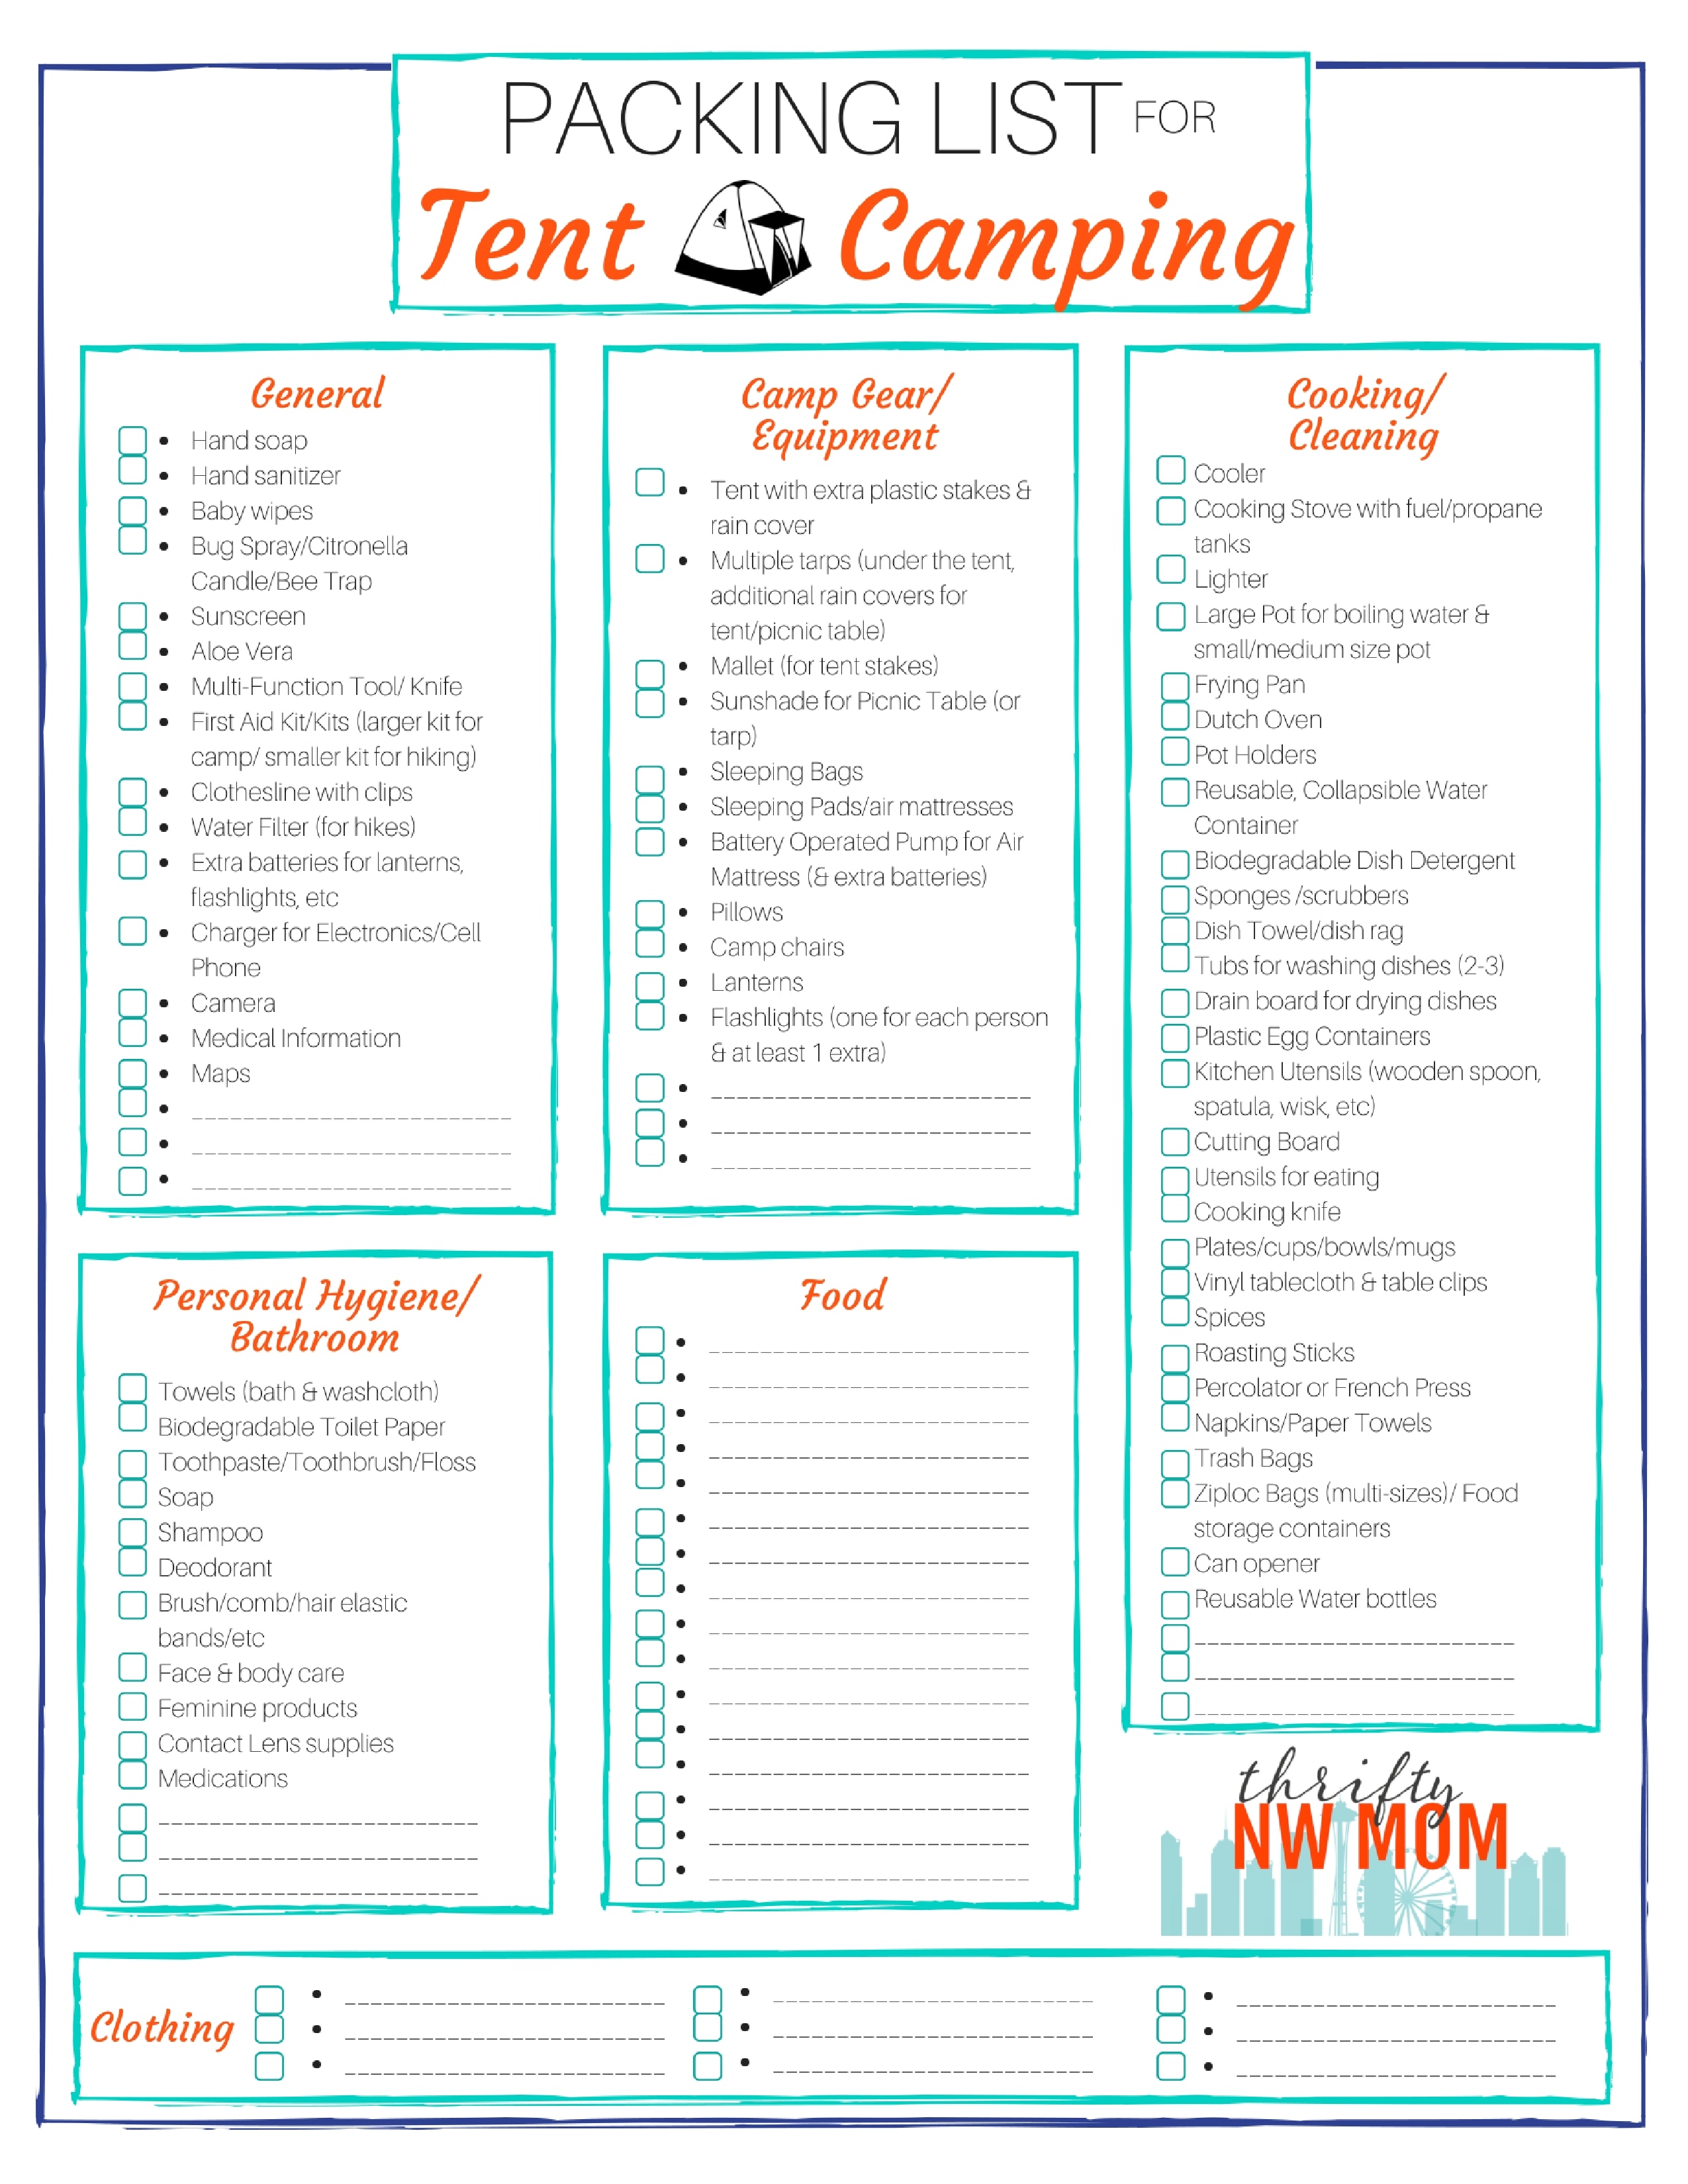 Packing List for Tent Camping - Free Printable